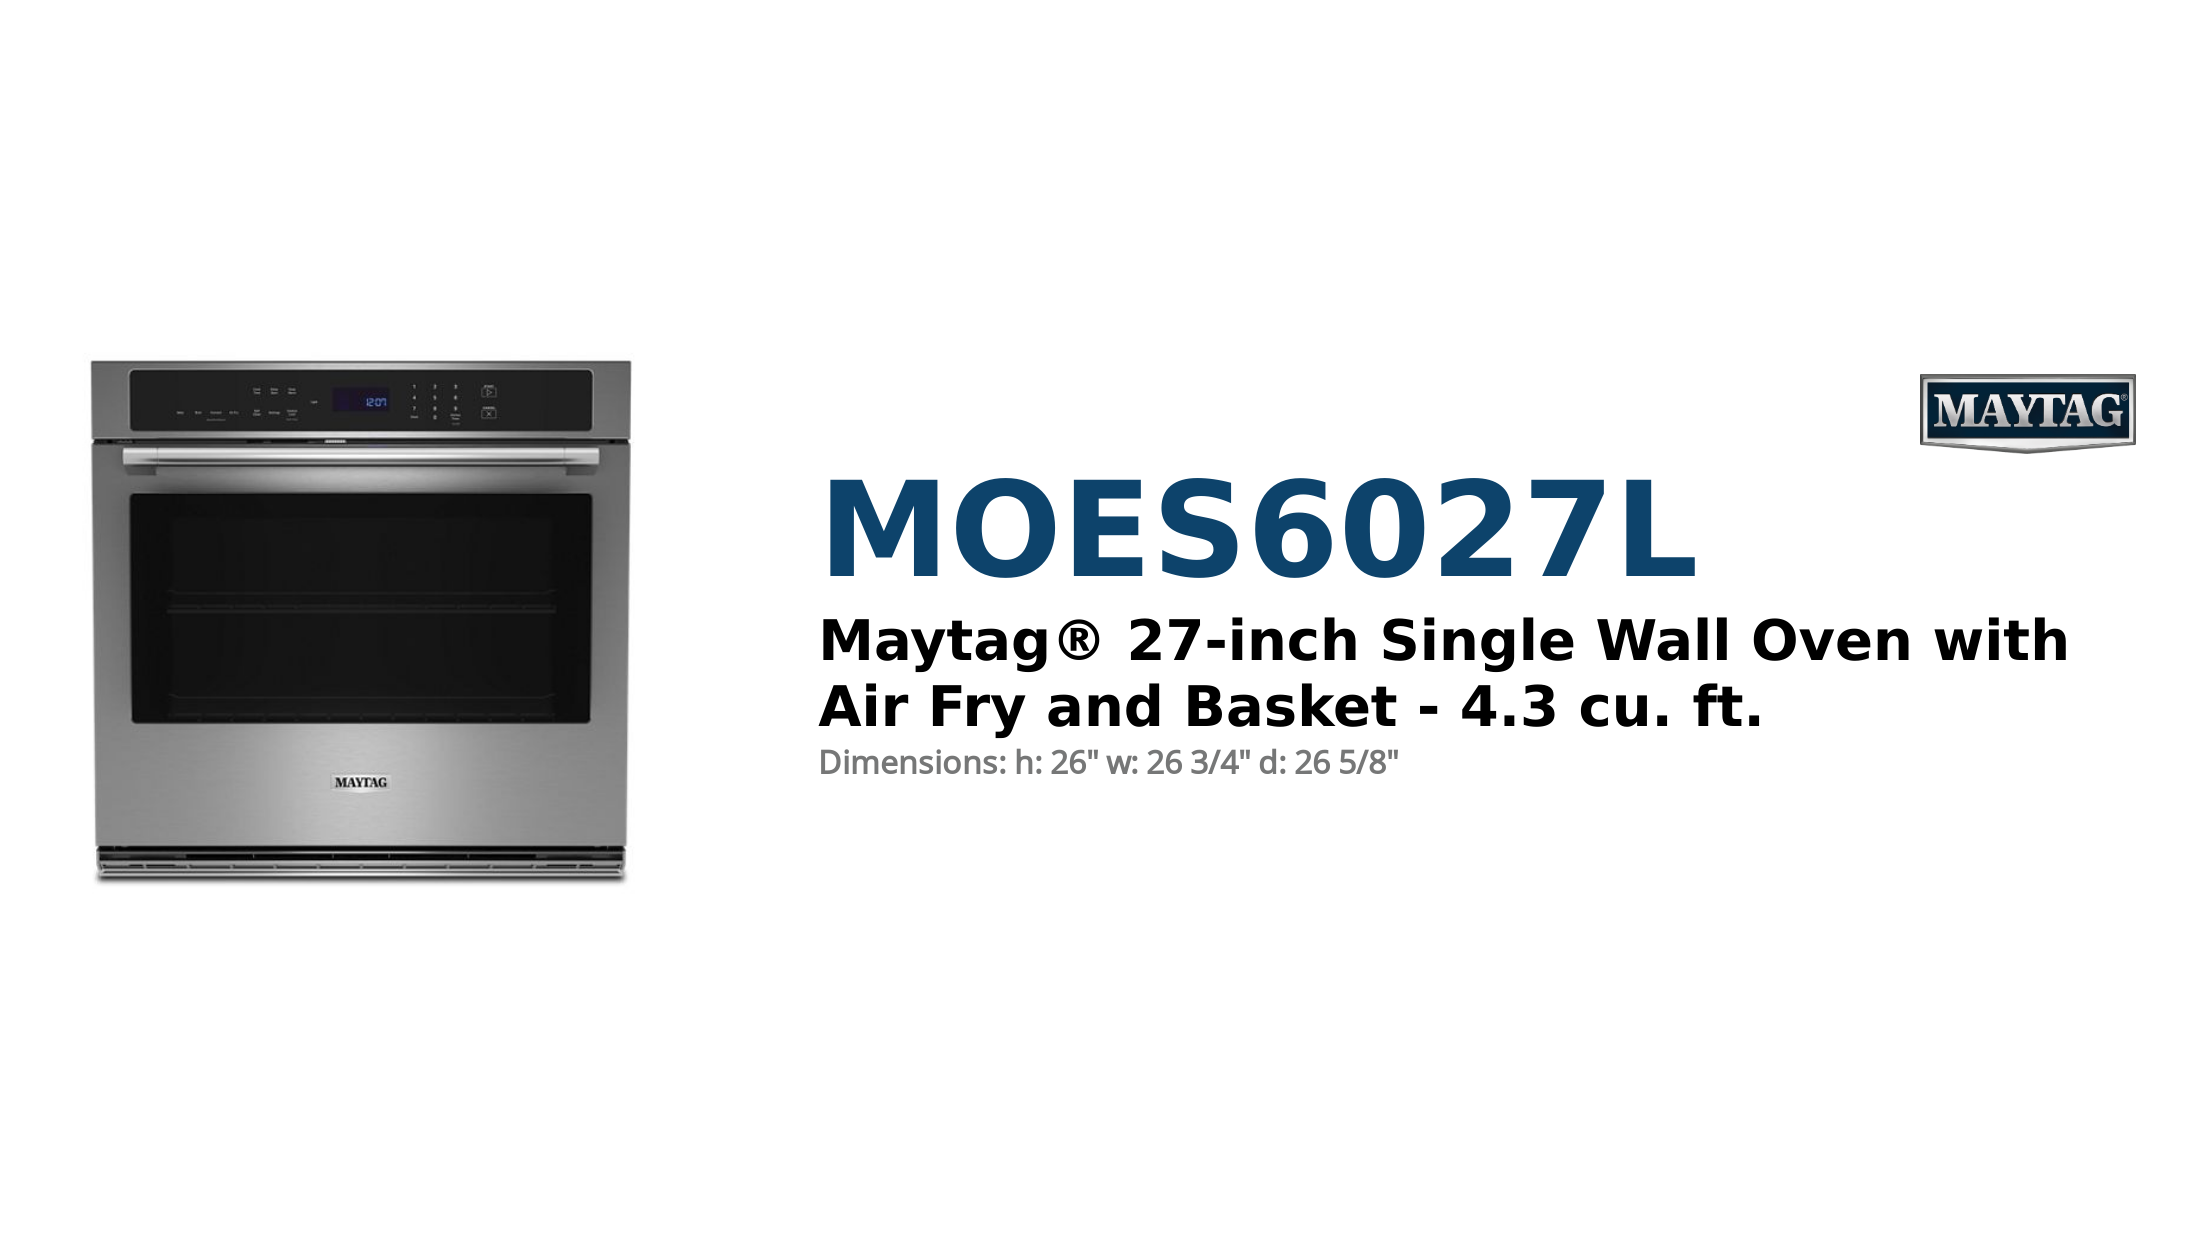 



MAYTAG® 27-INCH SINGLE WALL OVEN WITH AIR FRY AND BASKET - 4.3 CU. FT.



